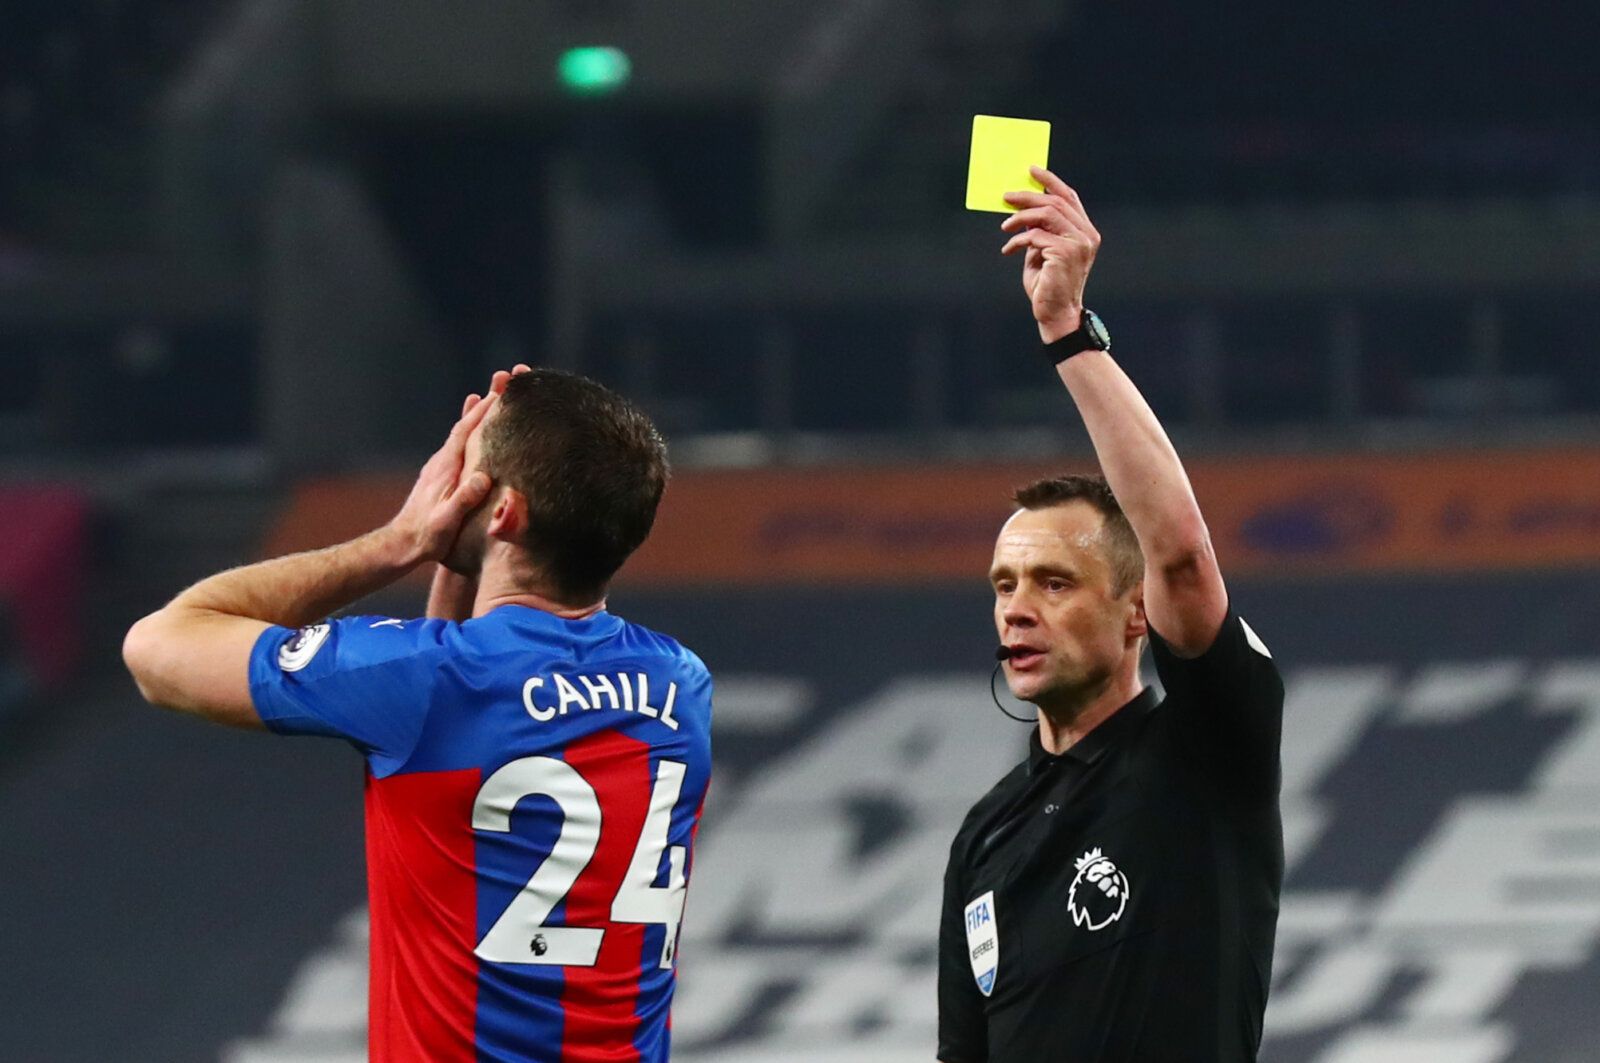 Soccer Football - Premier League - Tottenham Hotspur v Crystal Palace - Tottenham Hotspur Stadium, London, Britain - March 7, 2021 Crystal Palace's Gary Cahill reacts as he is shown a yellow card by referee Stuart Attwell Pool via REUTERS/Clive Rose EDITORIAL USE ONLY. No use with unauthorized audio, video, data, fixture lists, club/league logos or 'live' services. Online in-match use limited to 75 images, no video emulation. No use in betting, games or single club /league/player publications.  